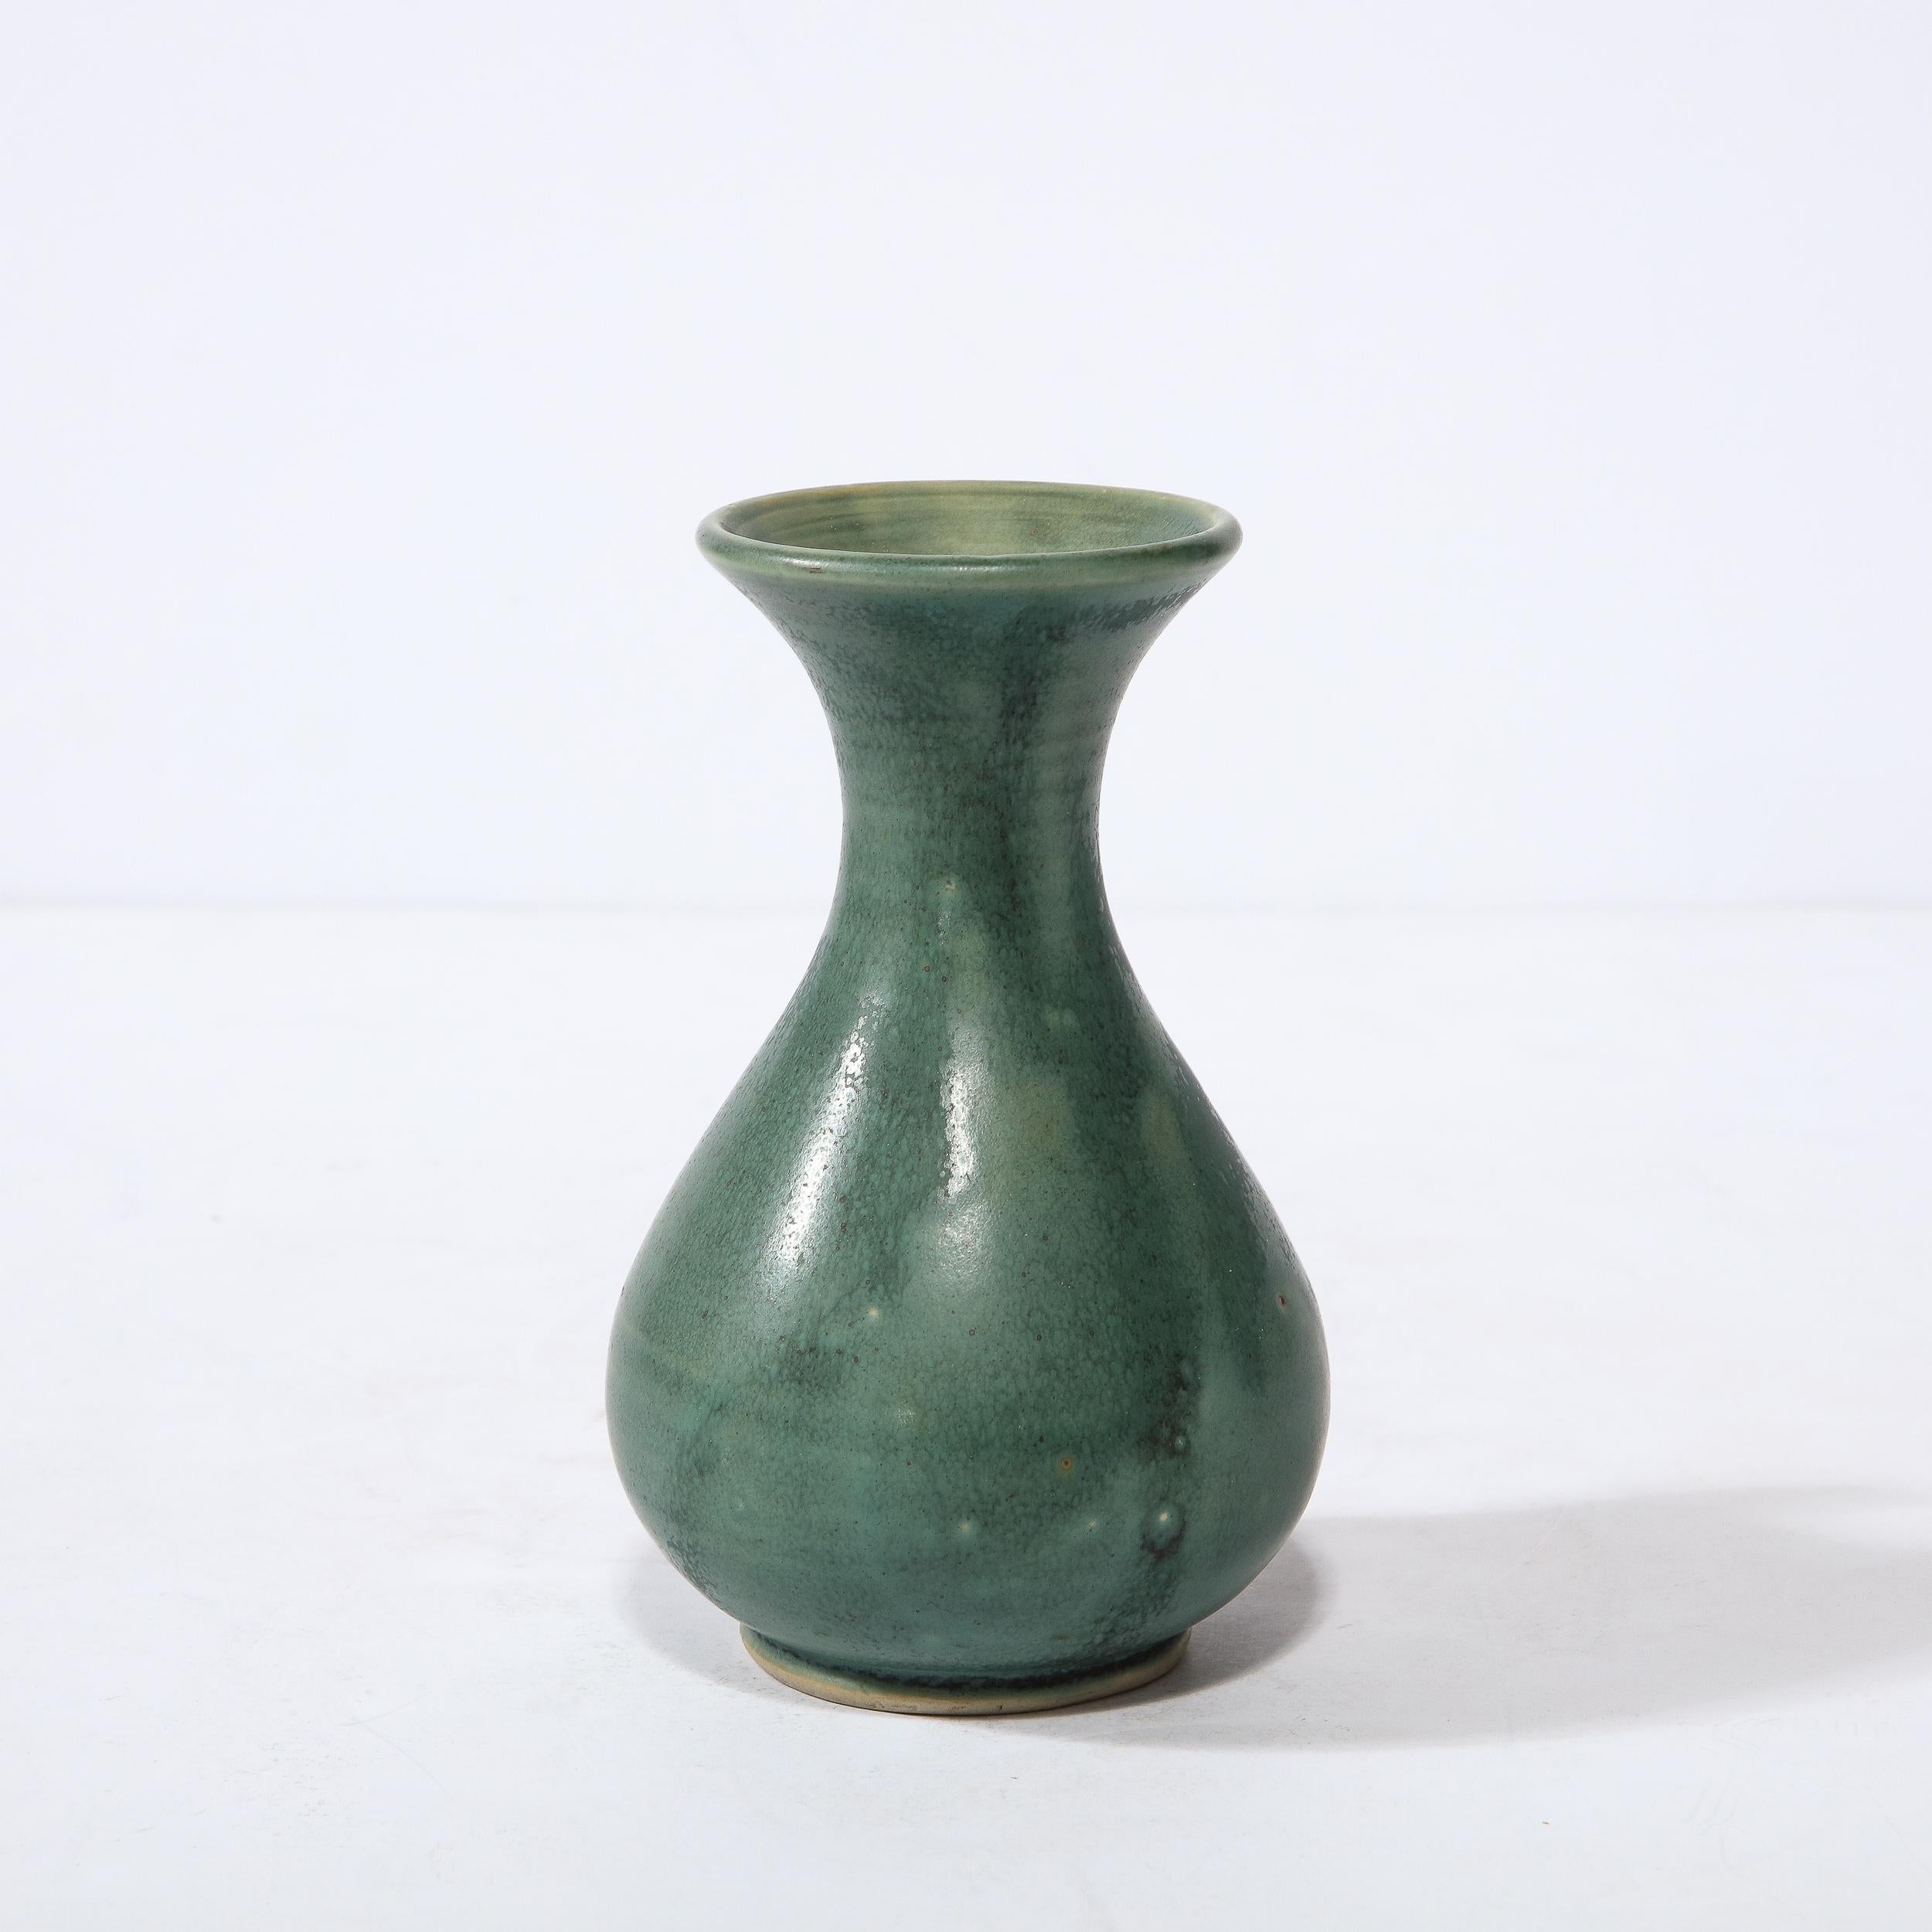 Indonesian Modernist Sculptural Muted Jade Glazed Ceramic Vase with Frog Motif in Relief For Sale